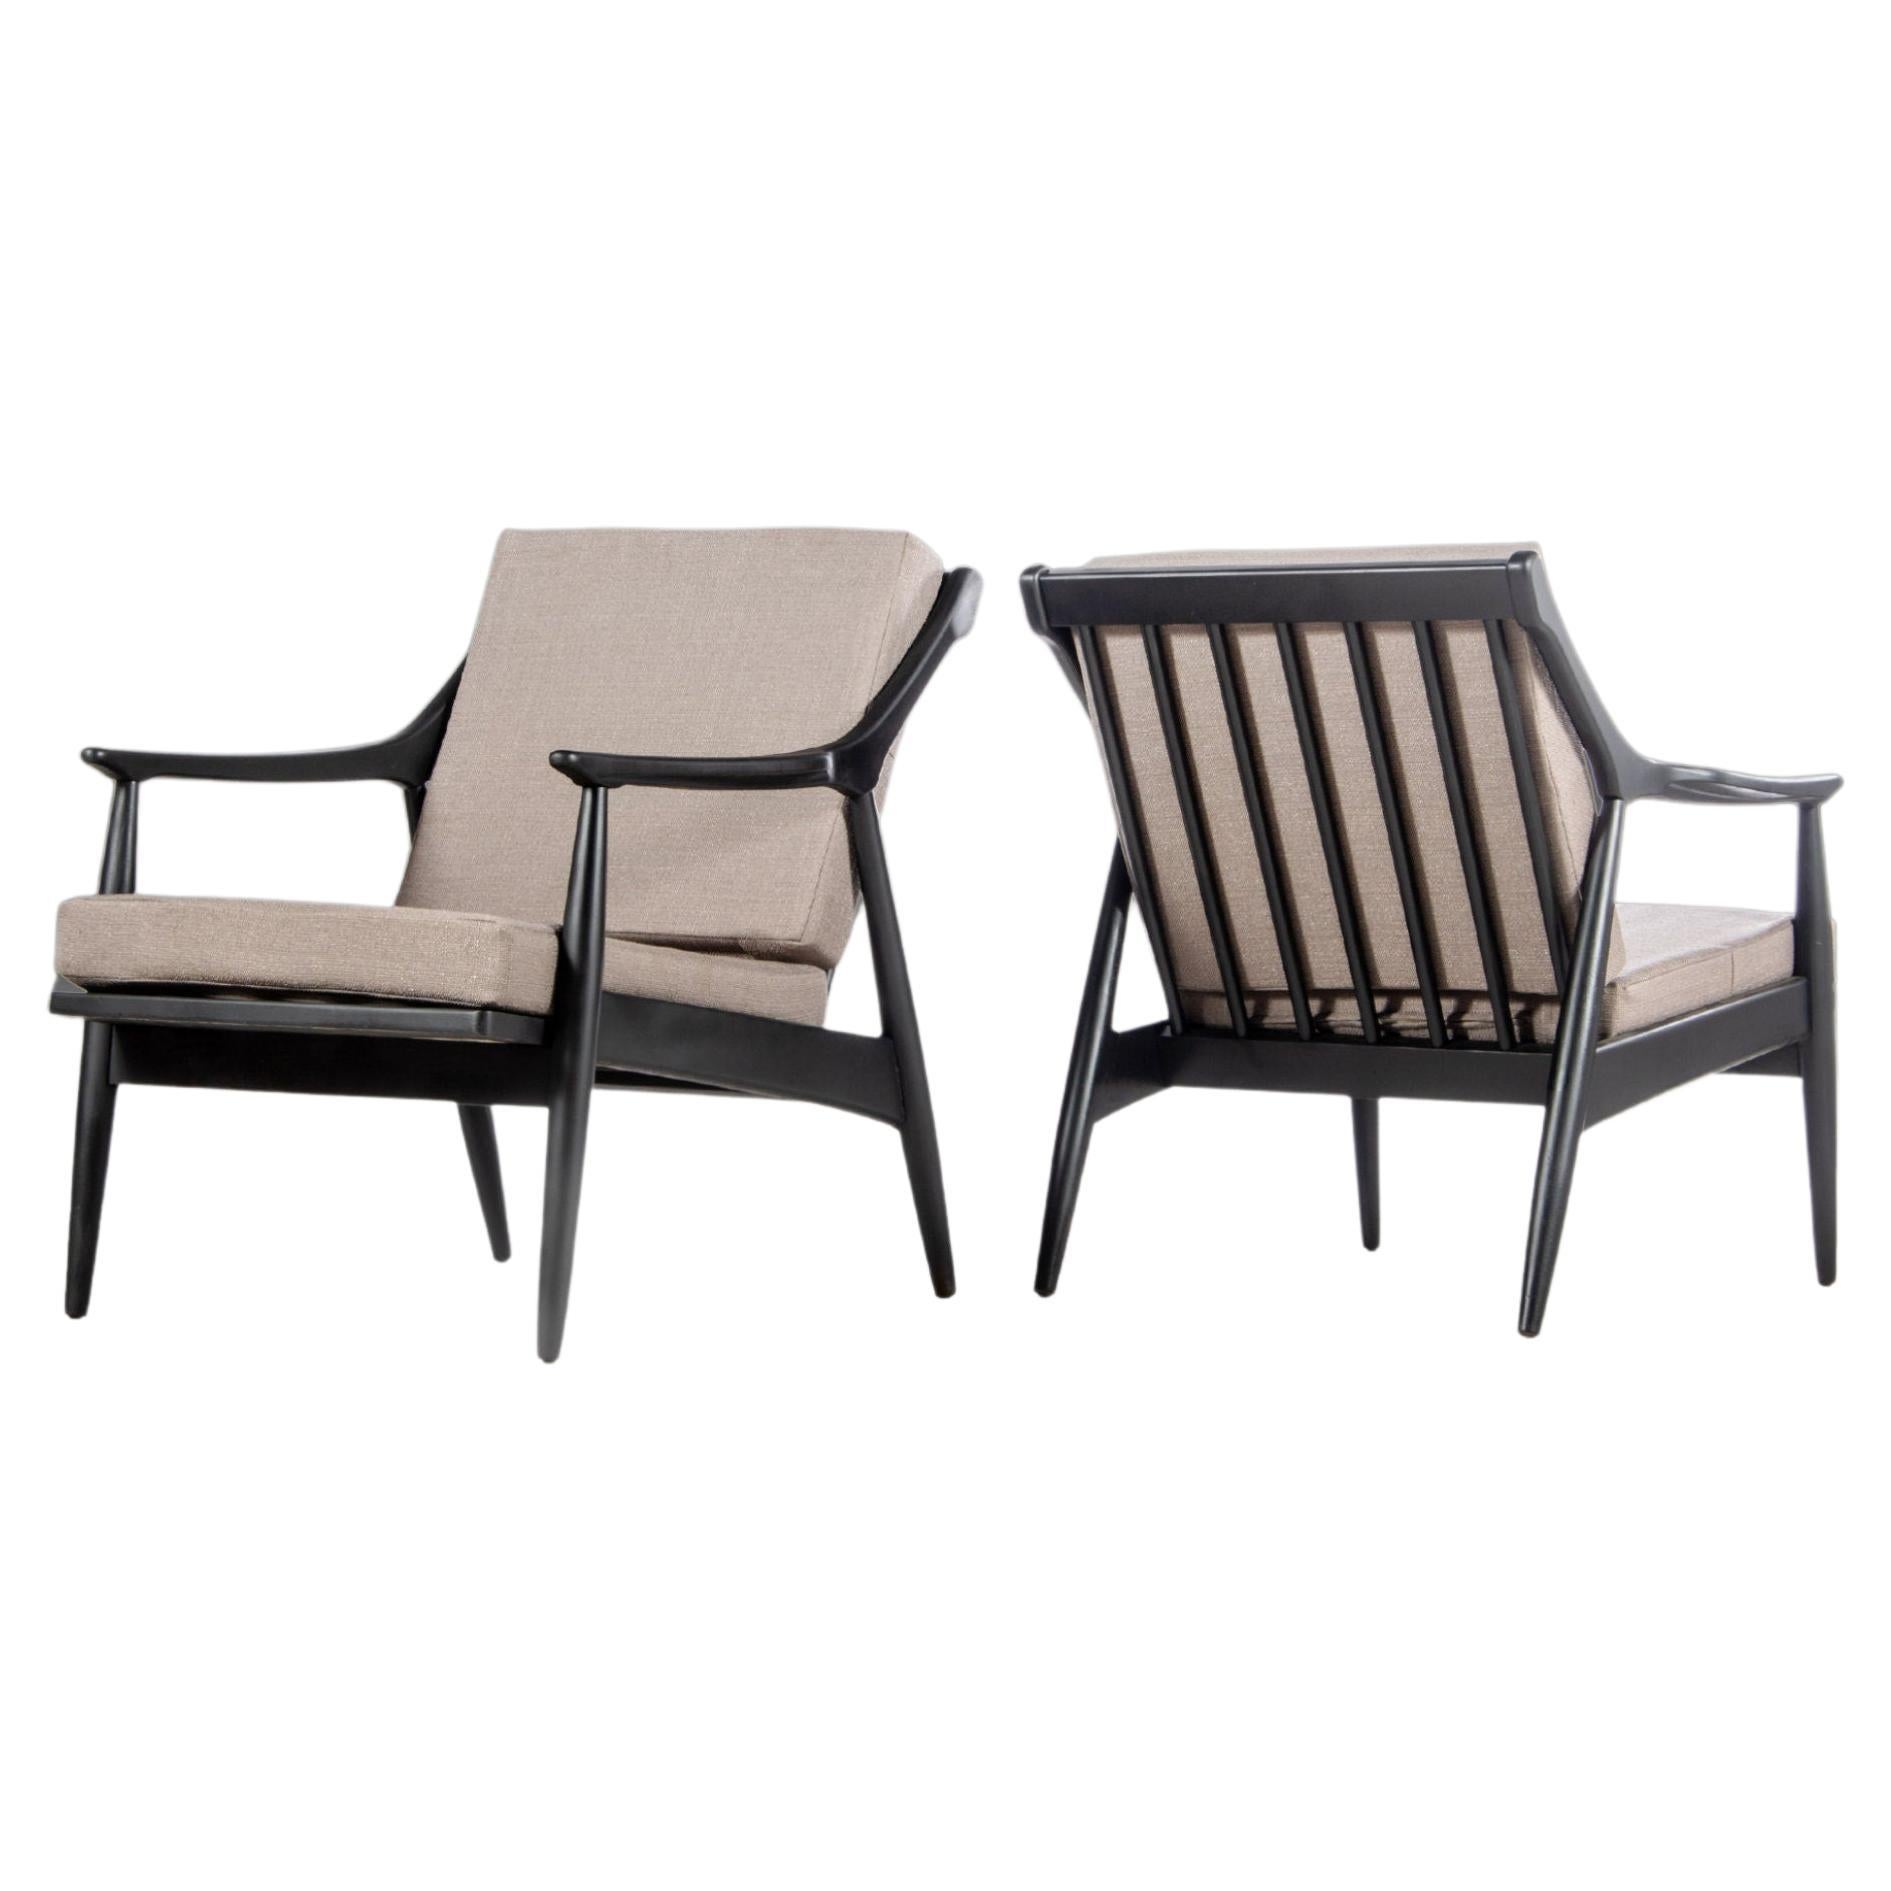 Set of Two '2' Ebony Danish Modern Lounge Chairs by Paoli in New Fabric, c 1960s For Sale